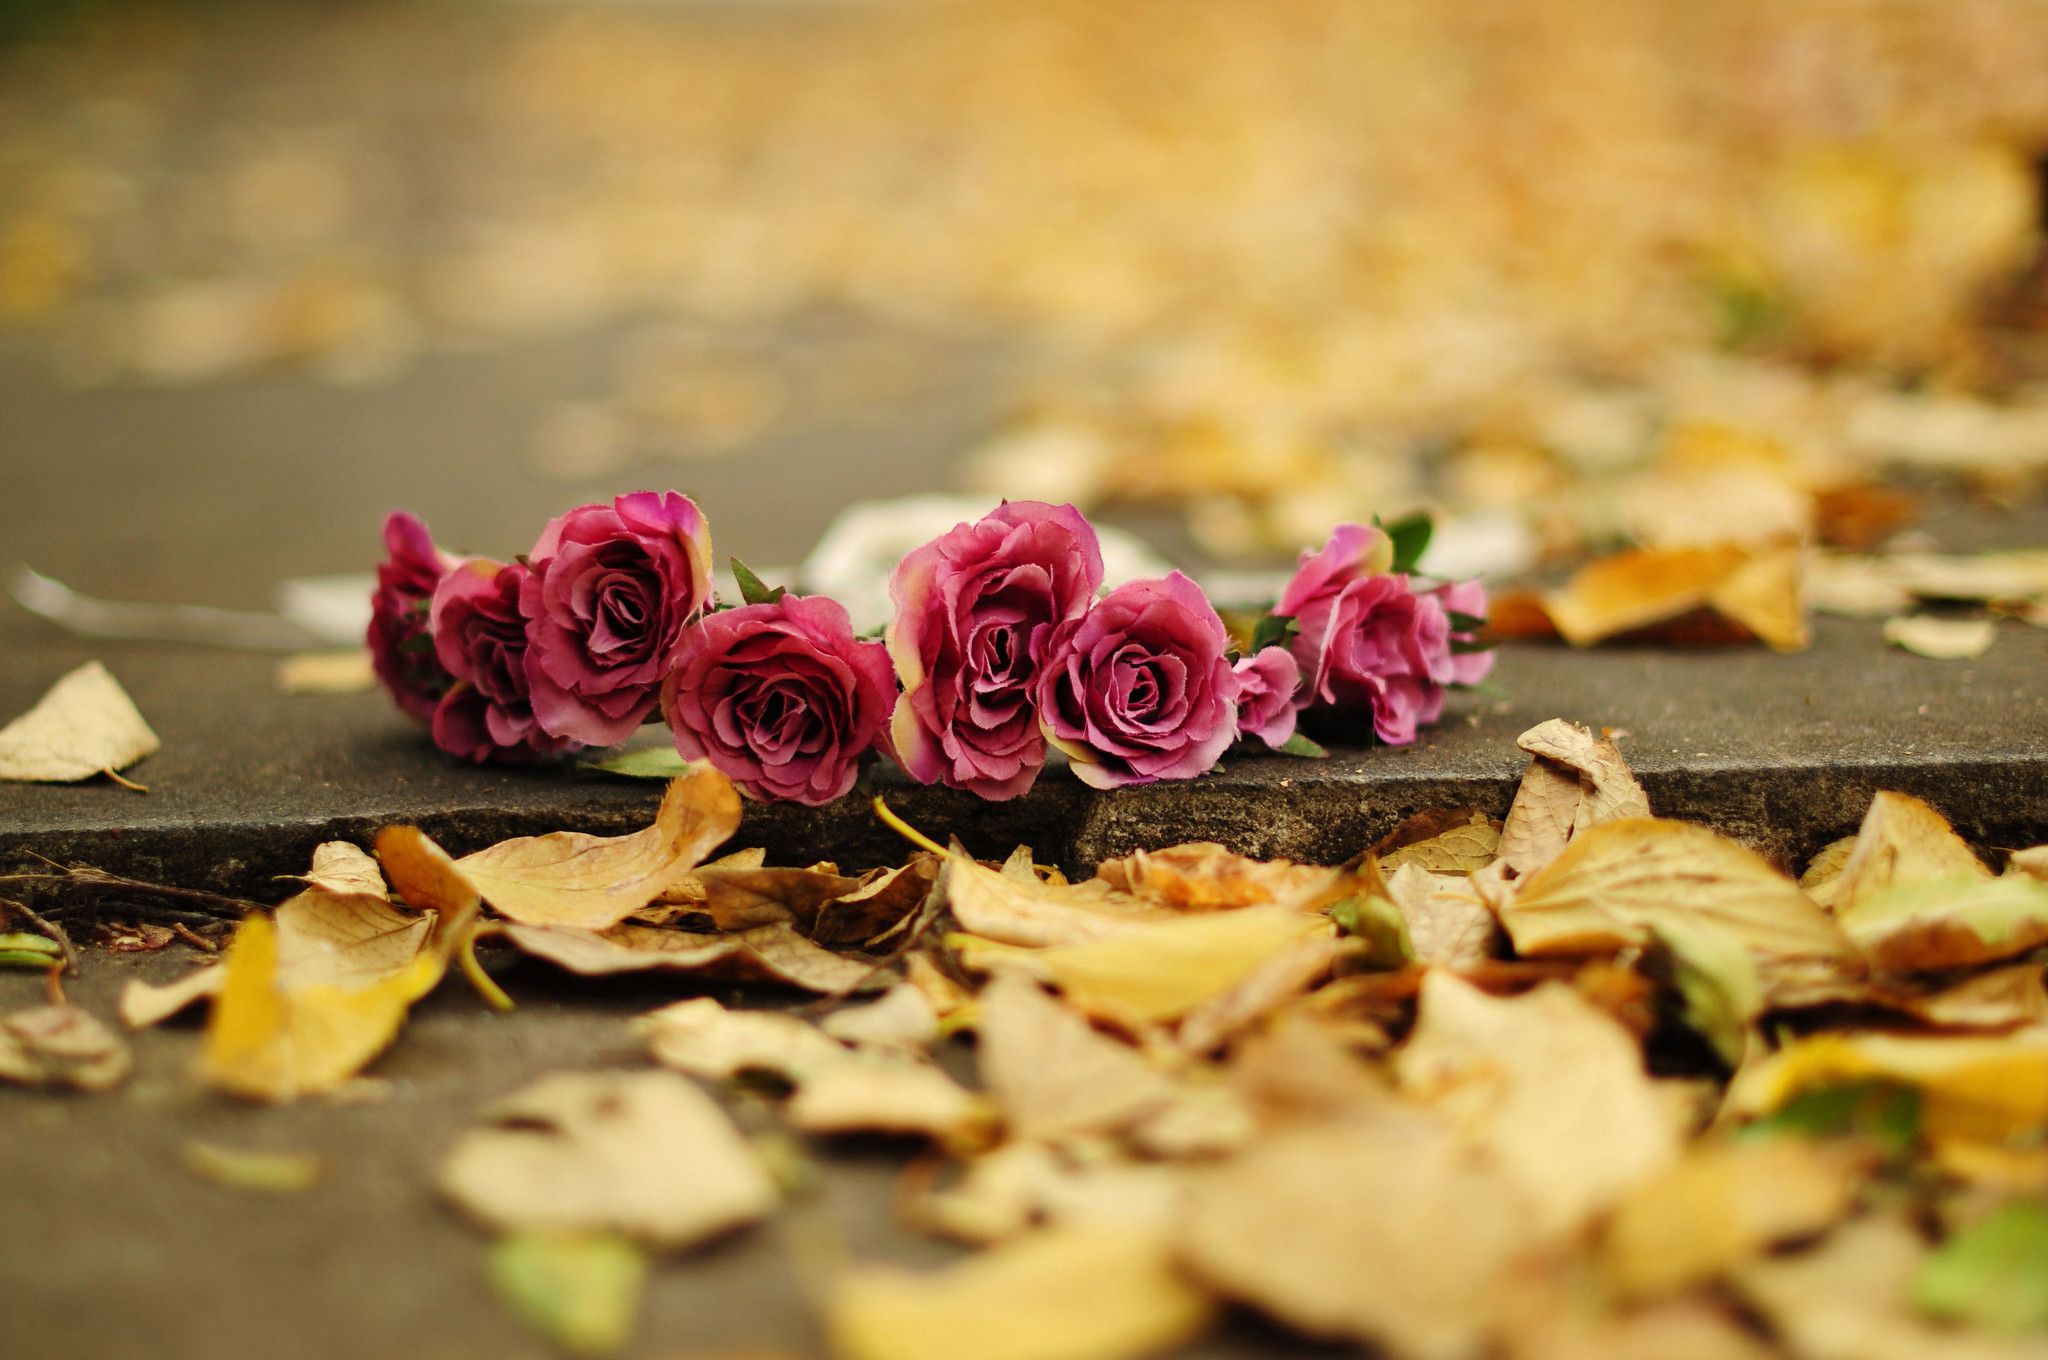 Autumn Flowers Stock Photos, Images and Backgrounds for Free Download